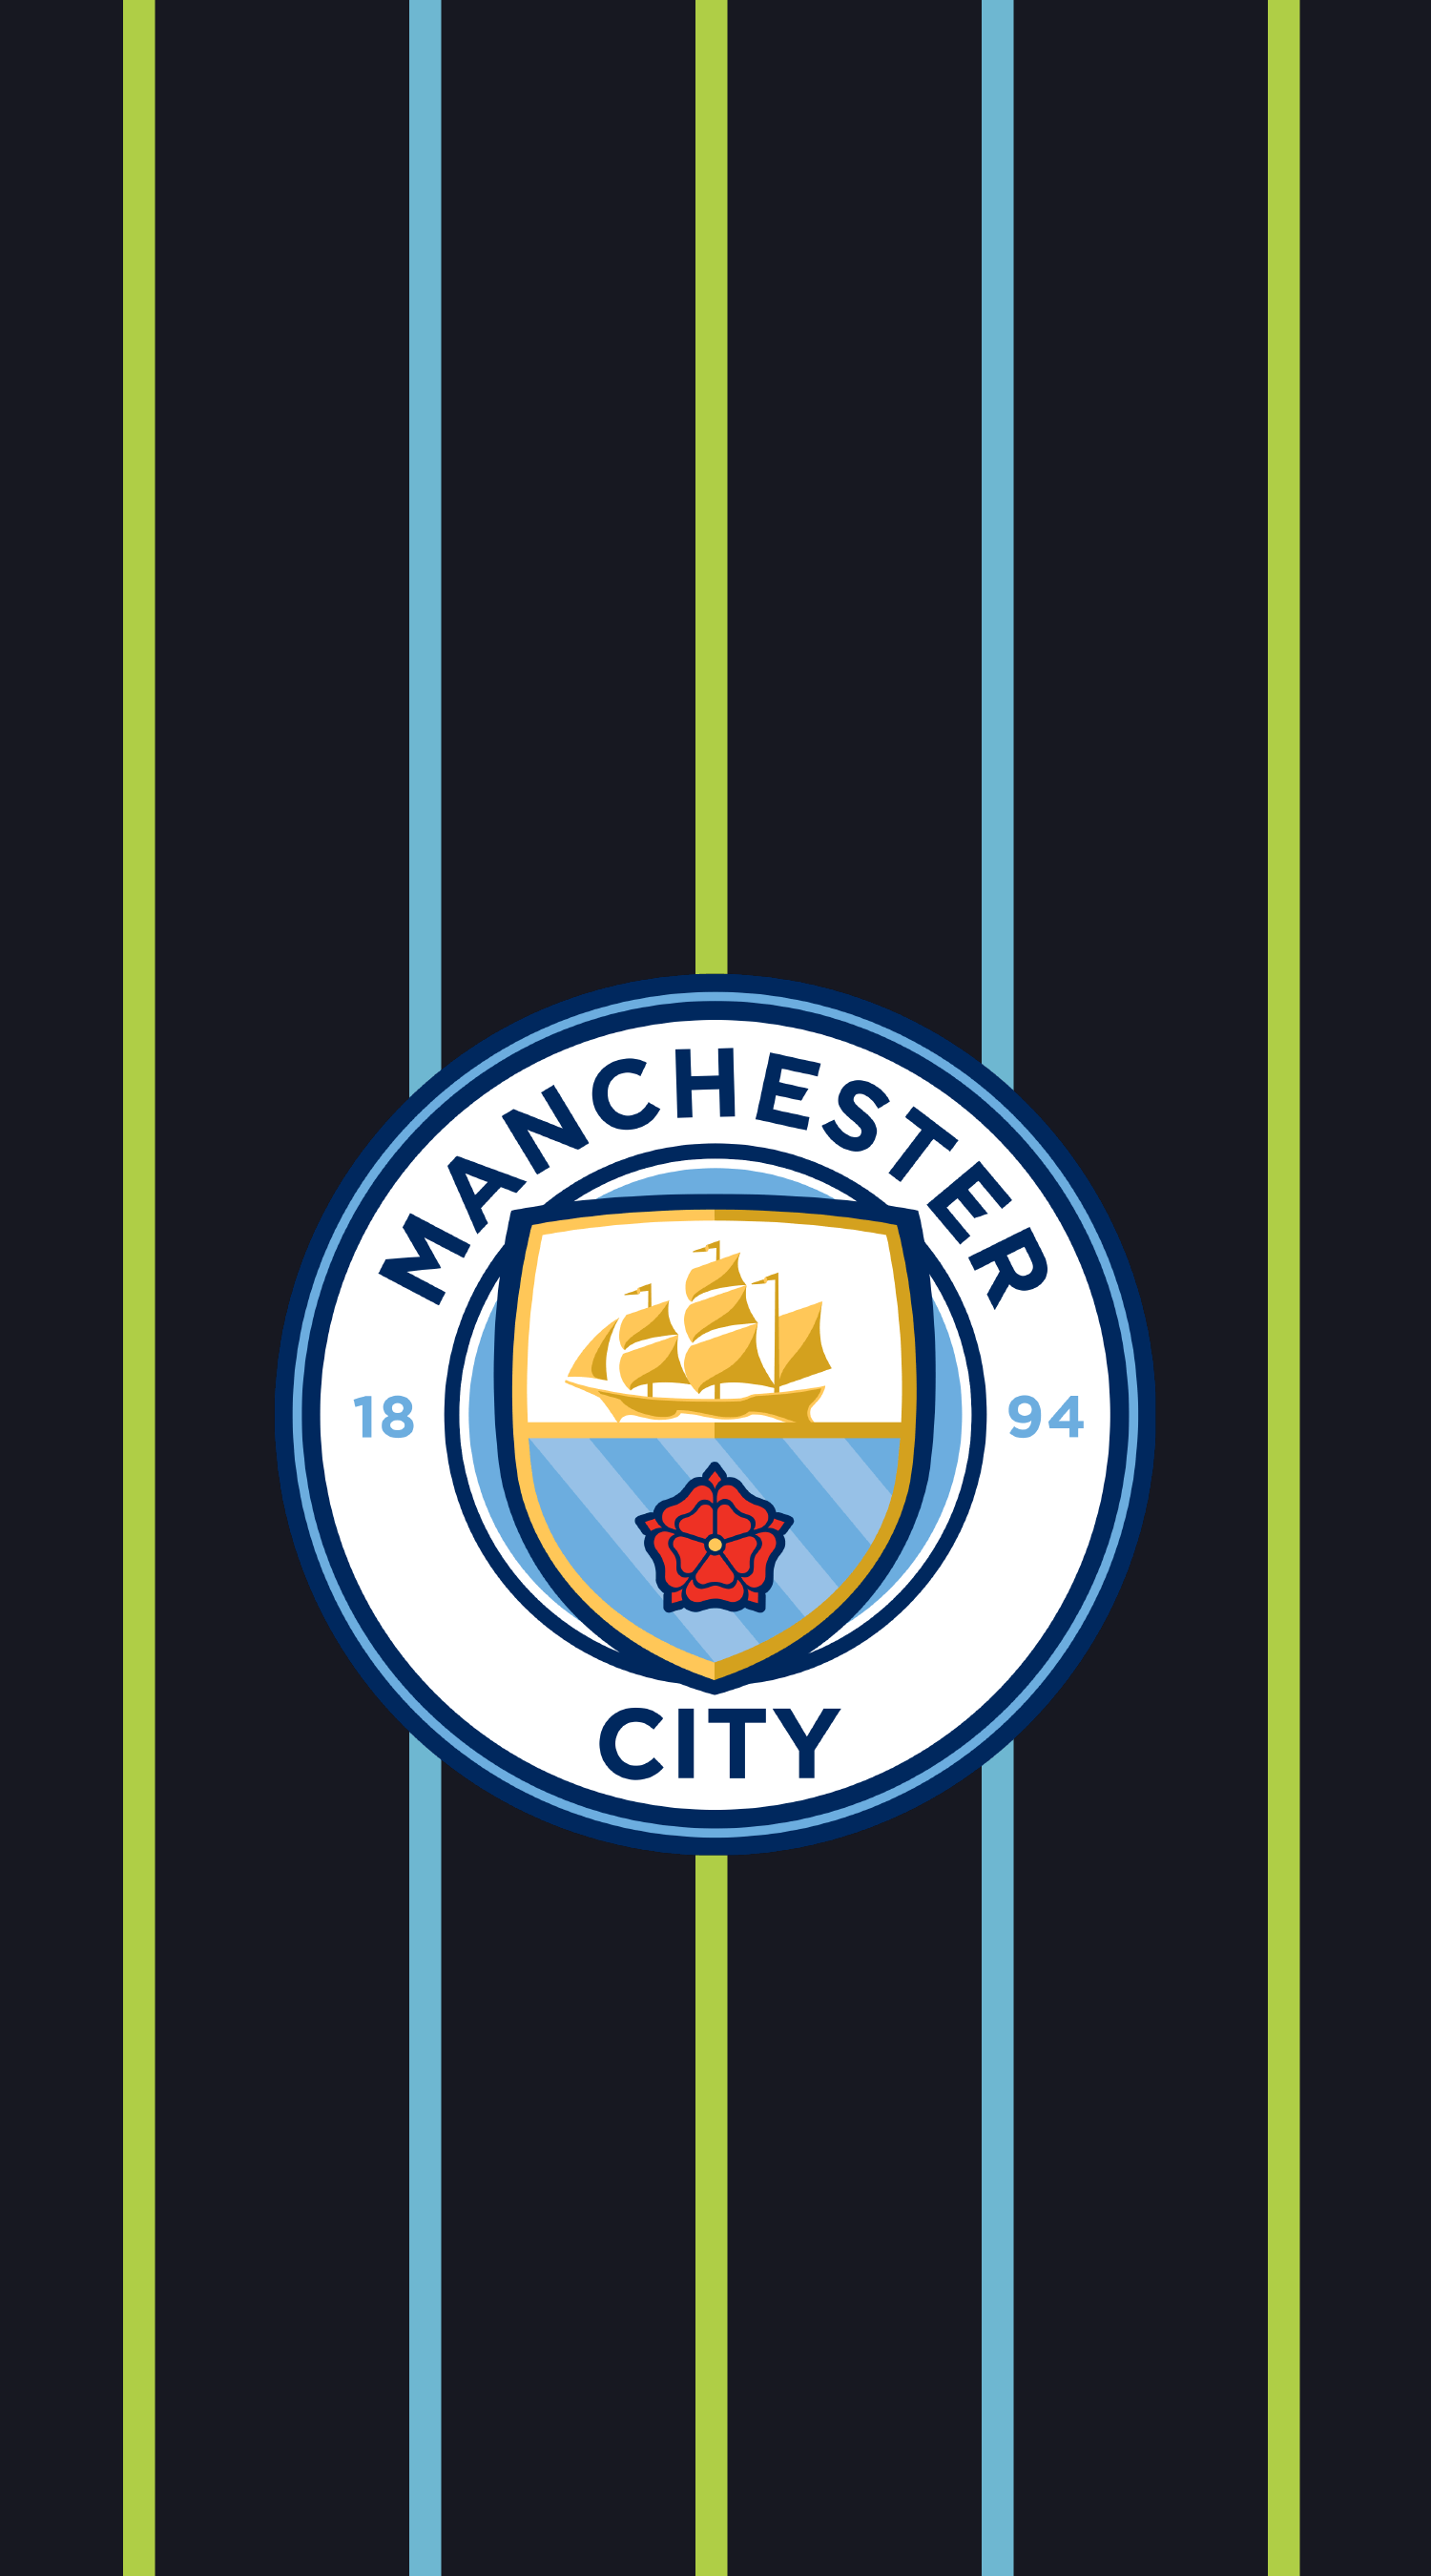 Manchester City Logo - Pin by airdragger on crests+kits | Pinterest | Manchester City ...